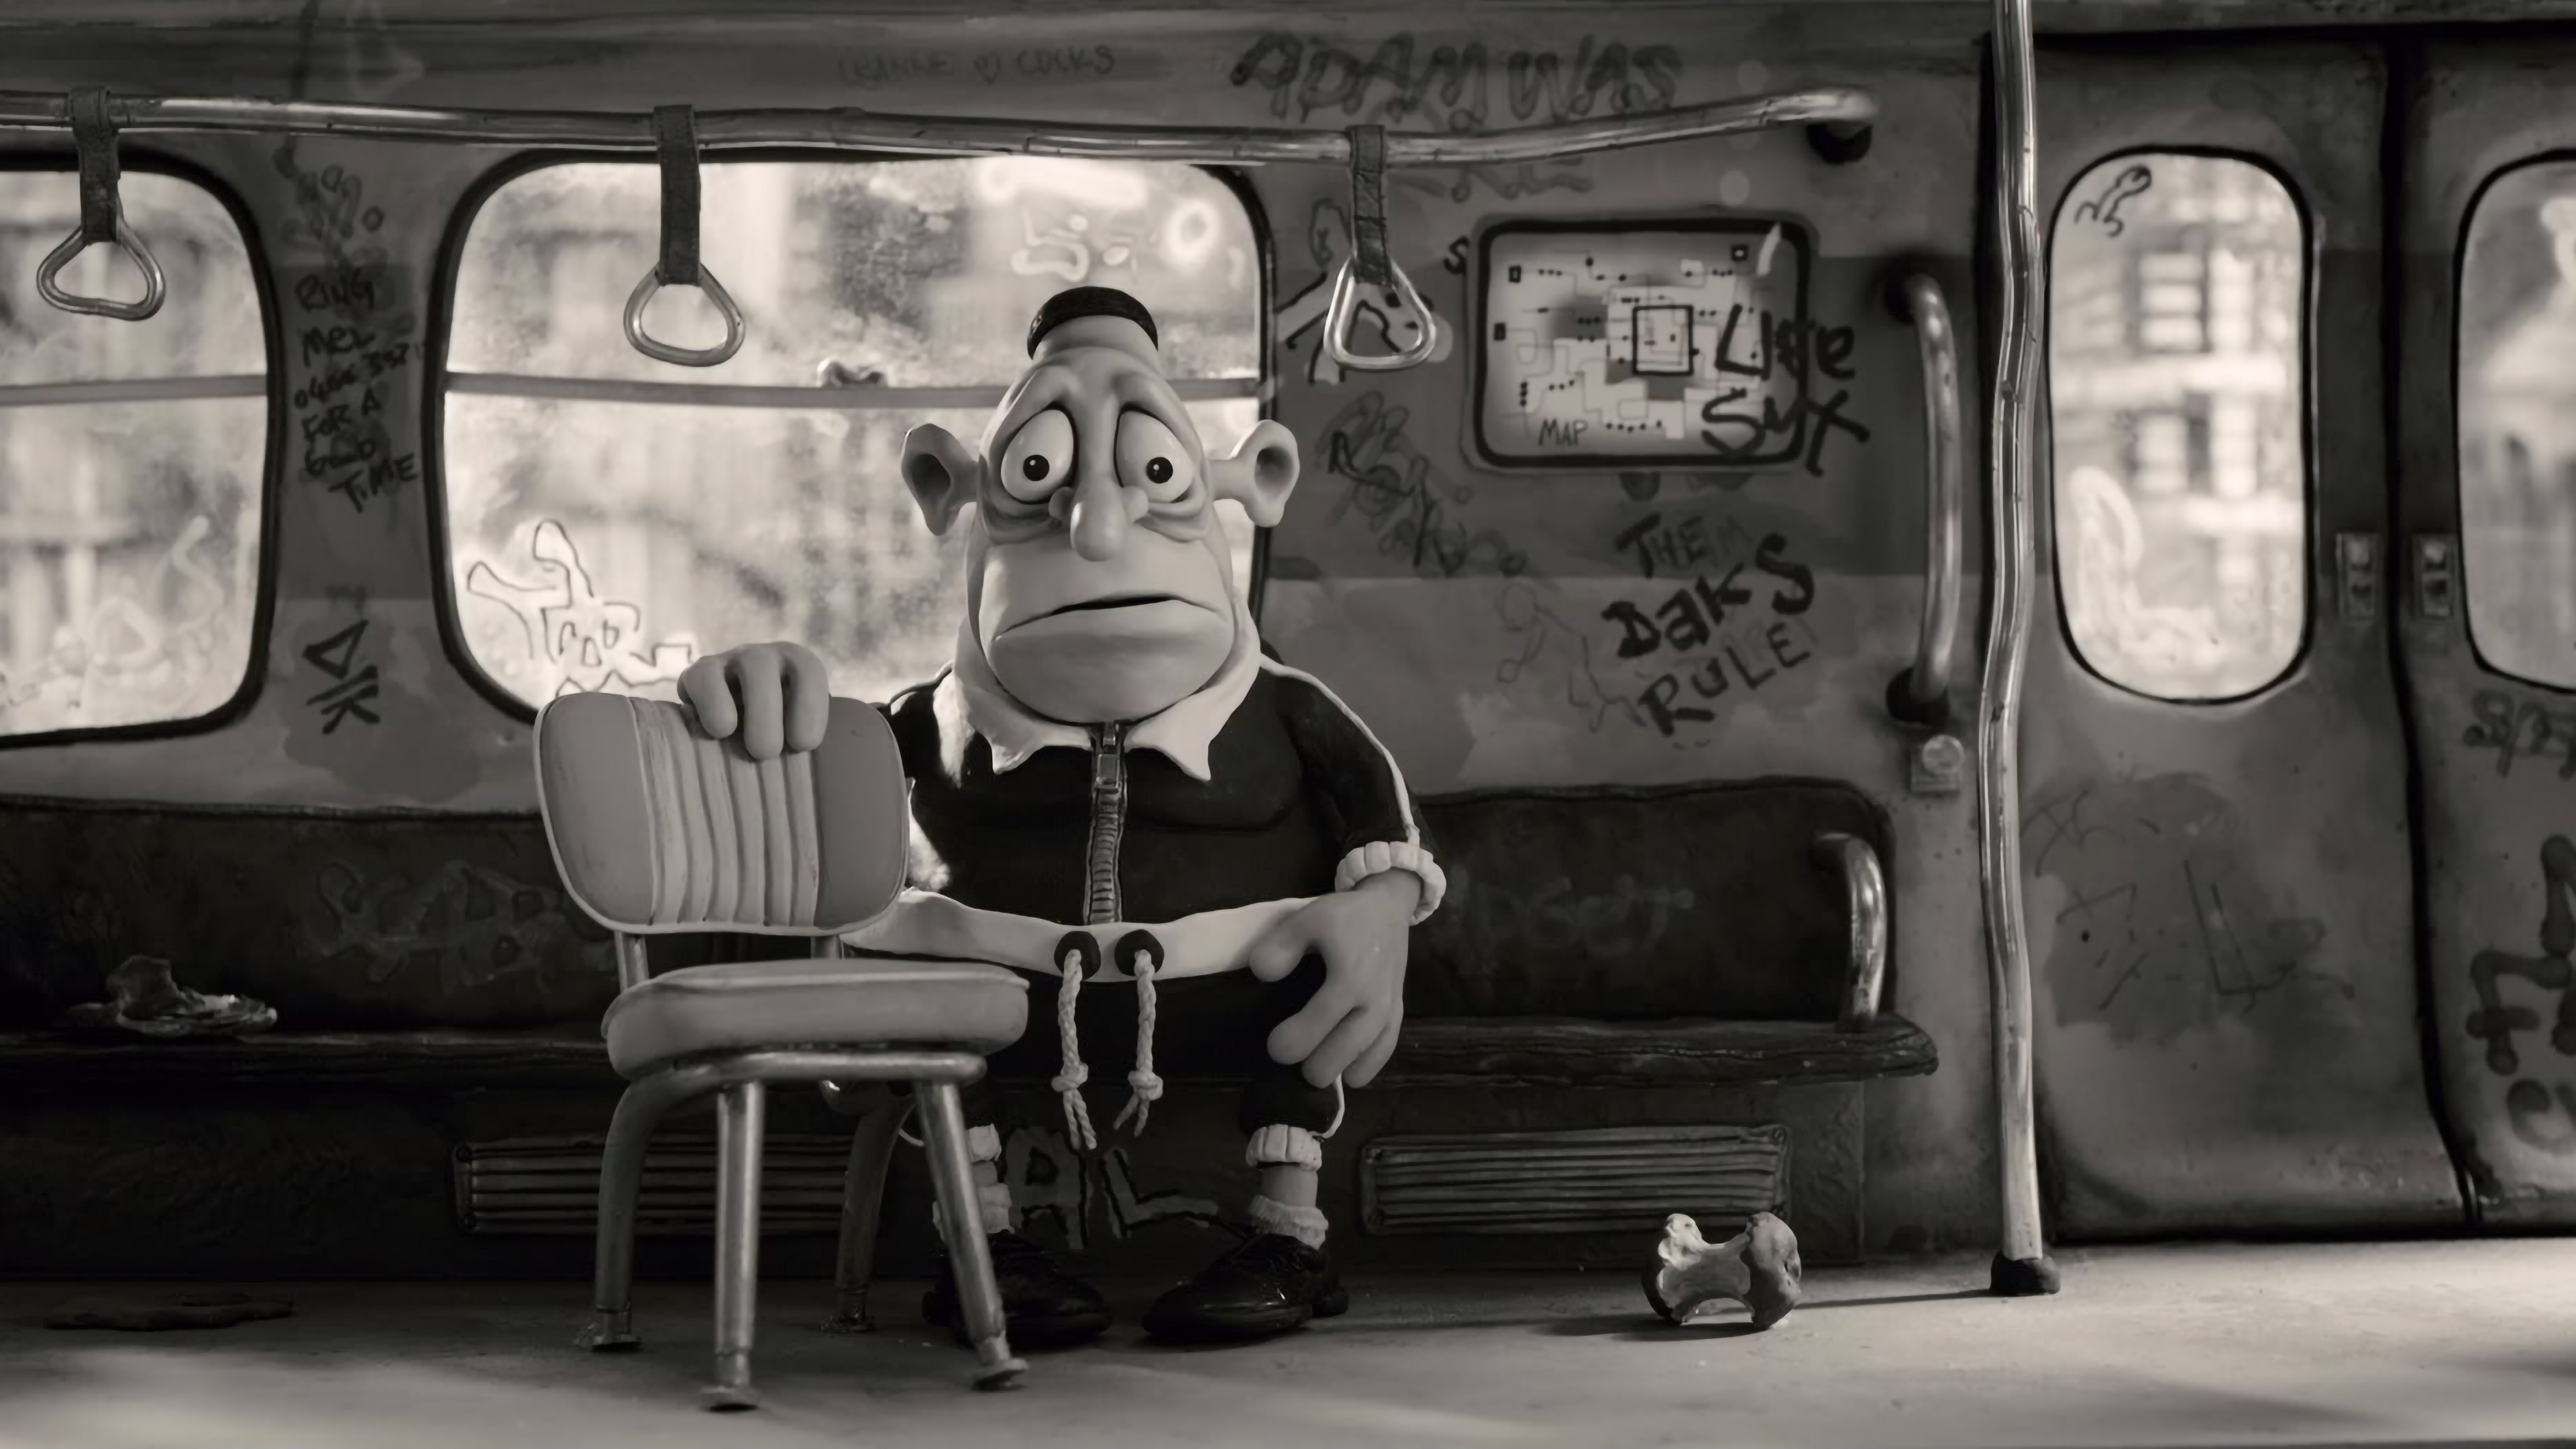 General 3840x2160 Mary and Max puppets low saturation stop motion monochrome digital art